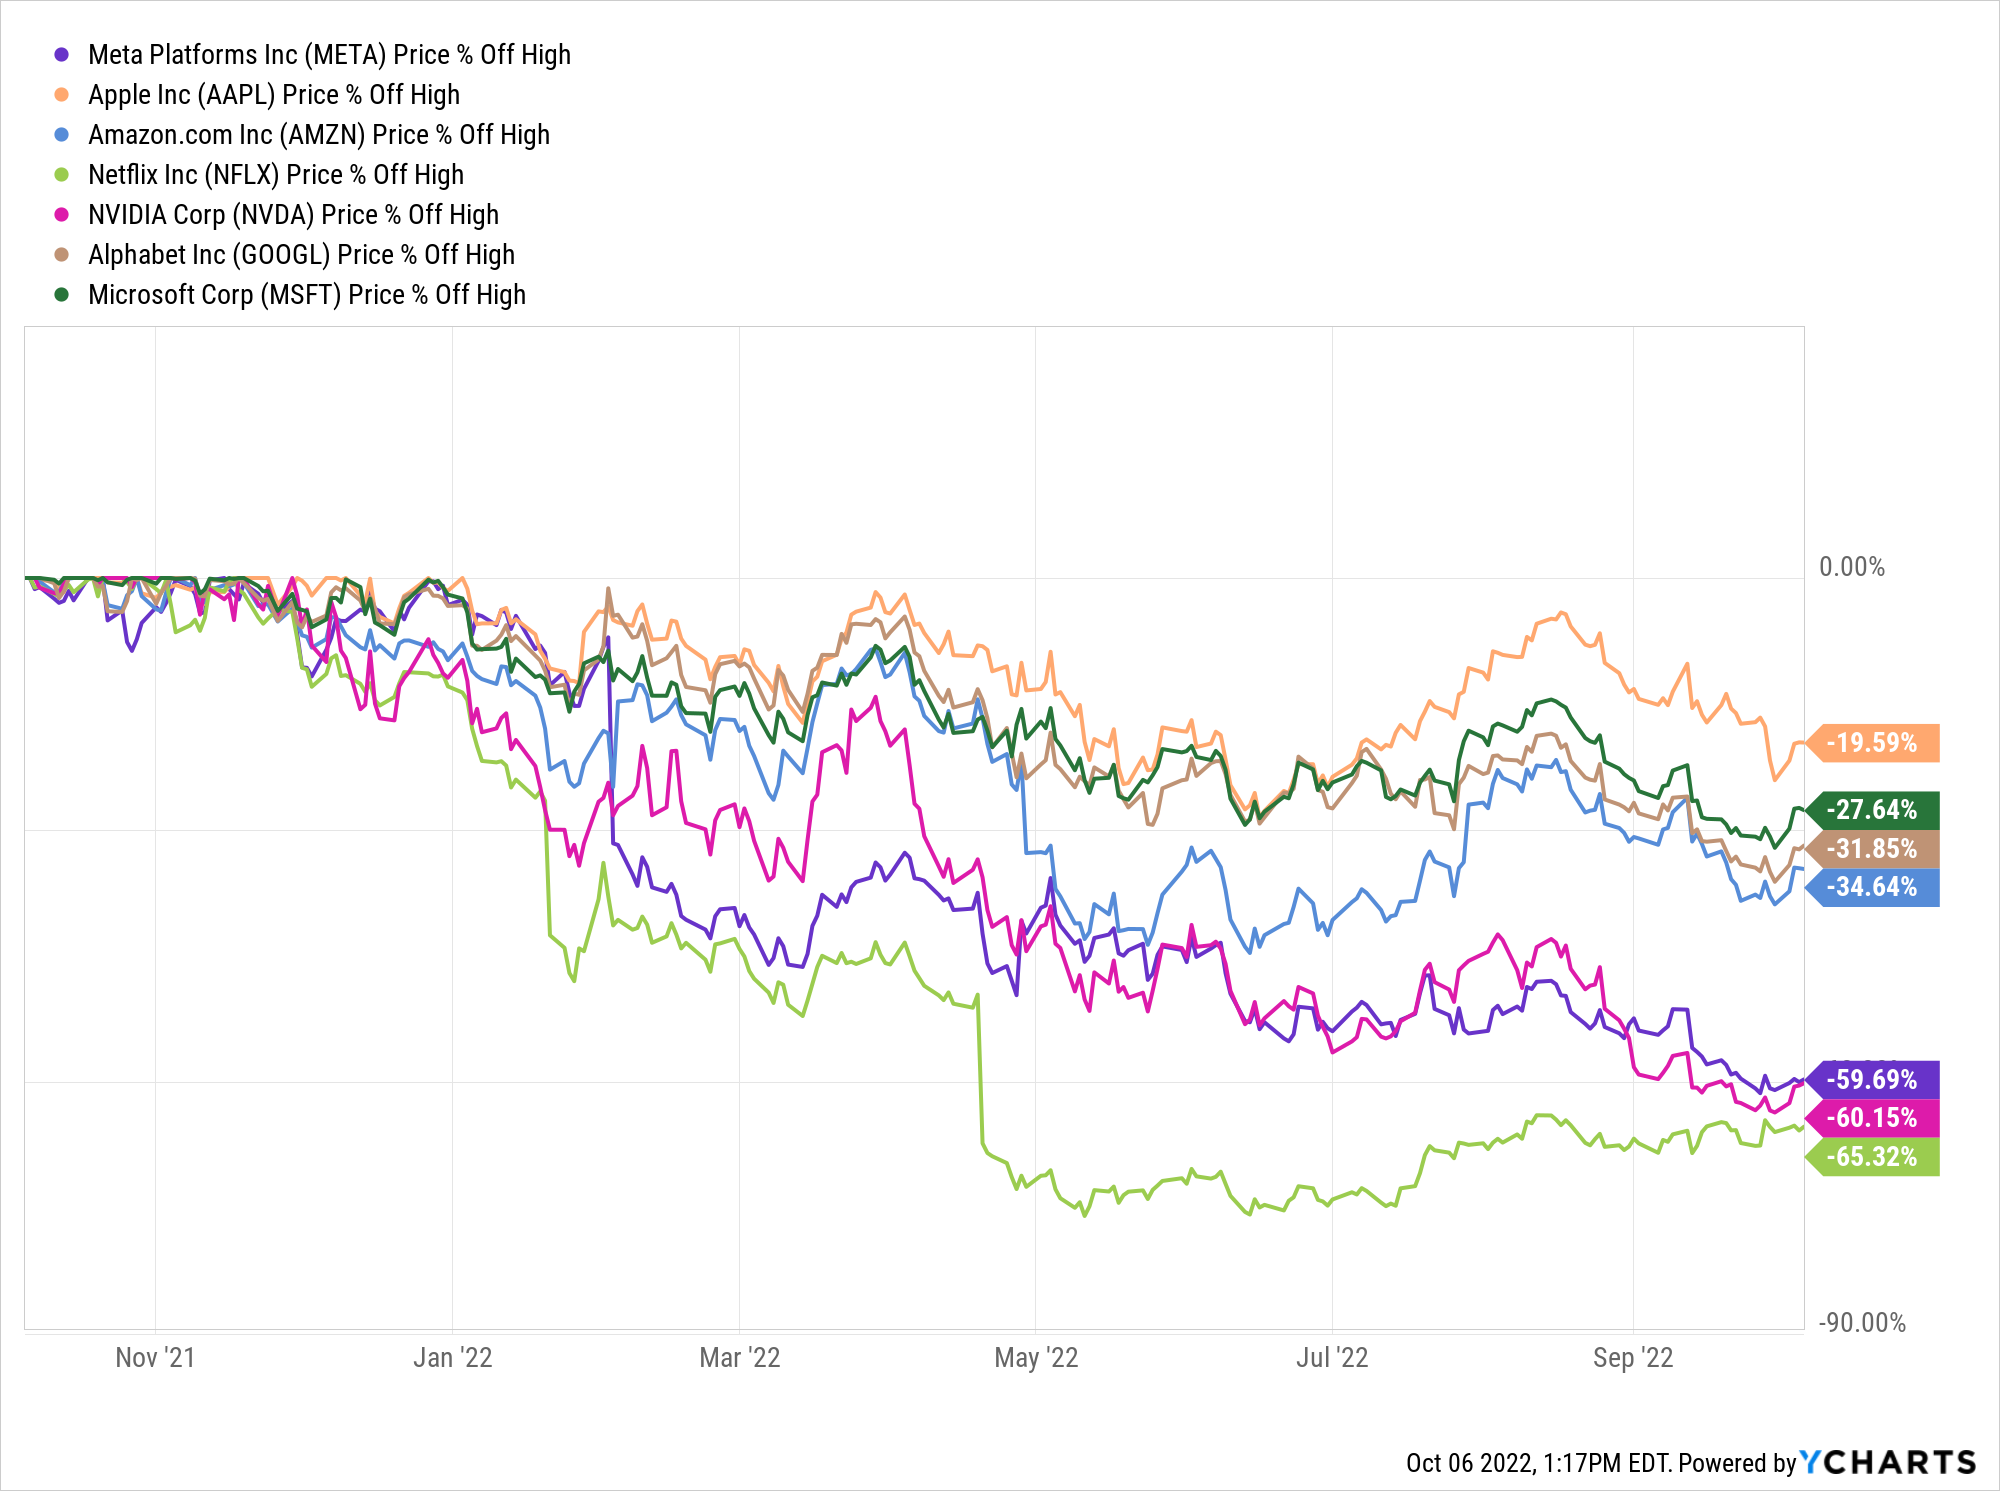 A graph showing the change in META, AMZN, AAPL, GOOGL, NFLX, NVDA, MSFT stock off percent highs over time